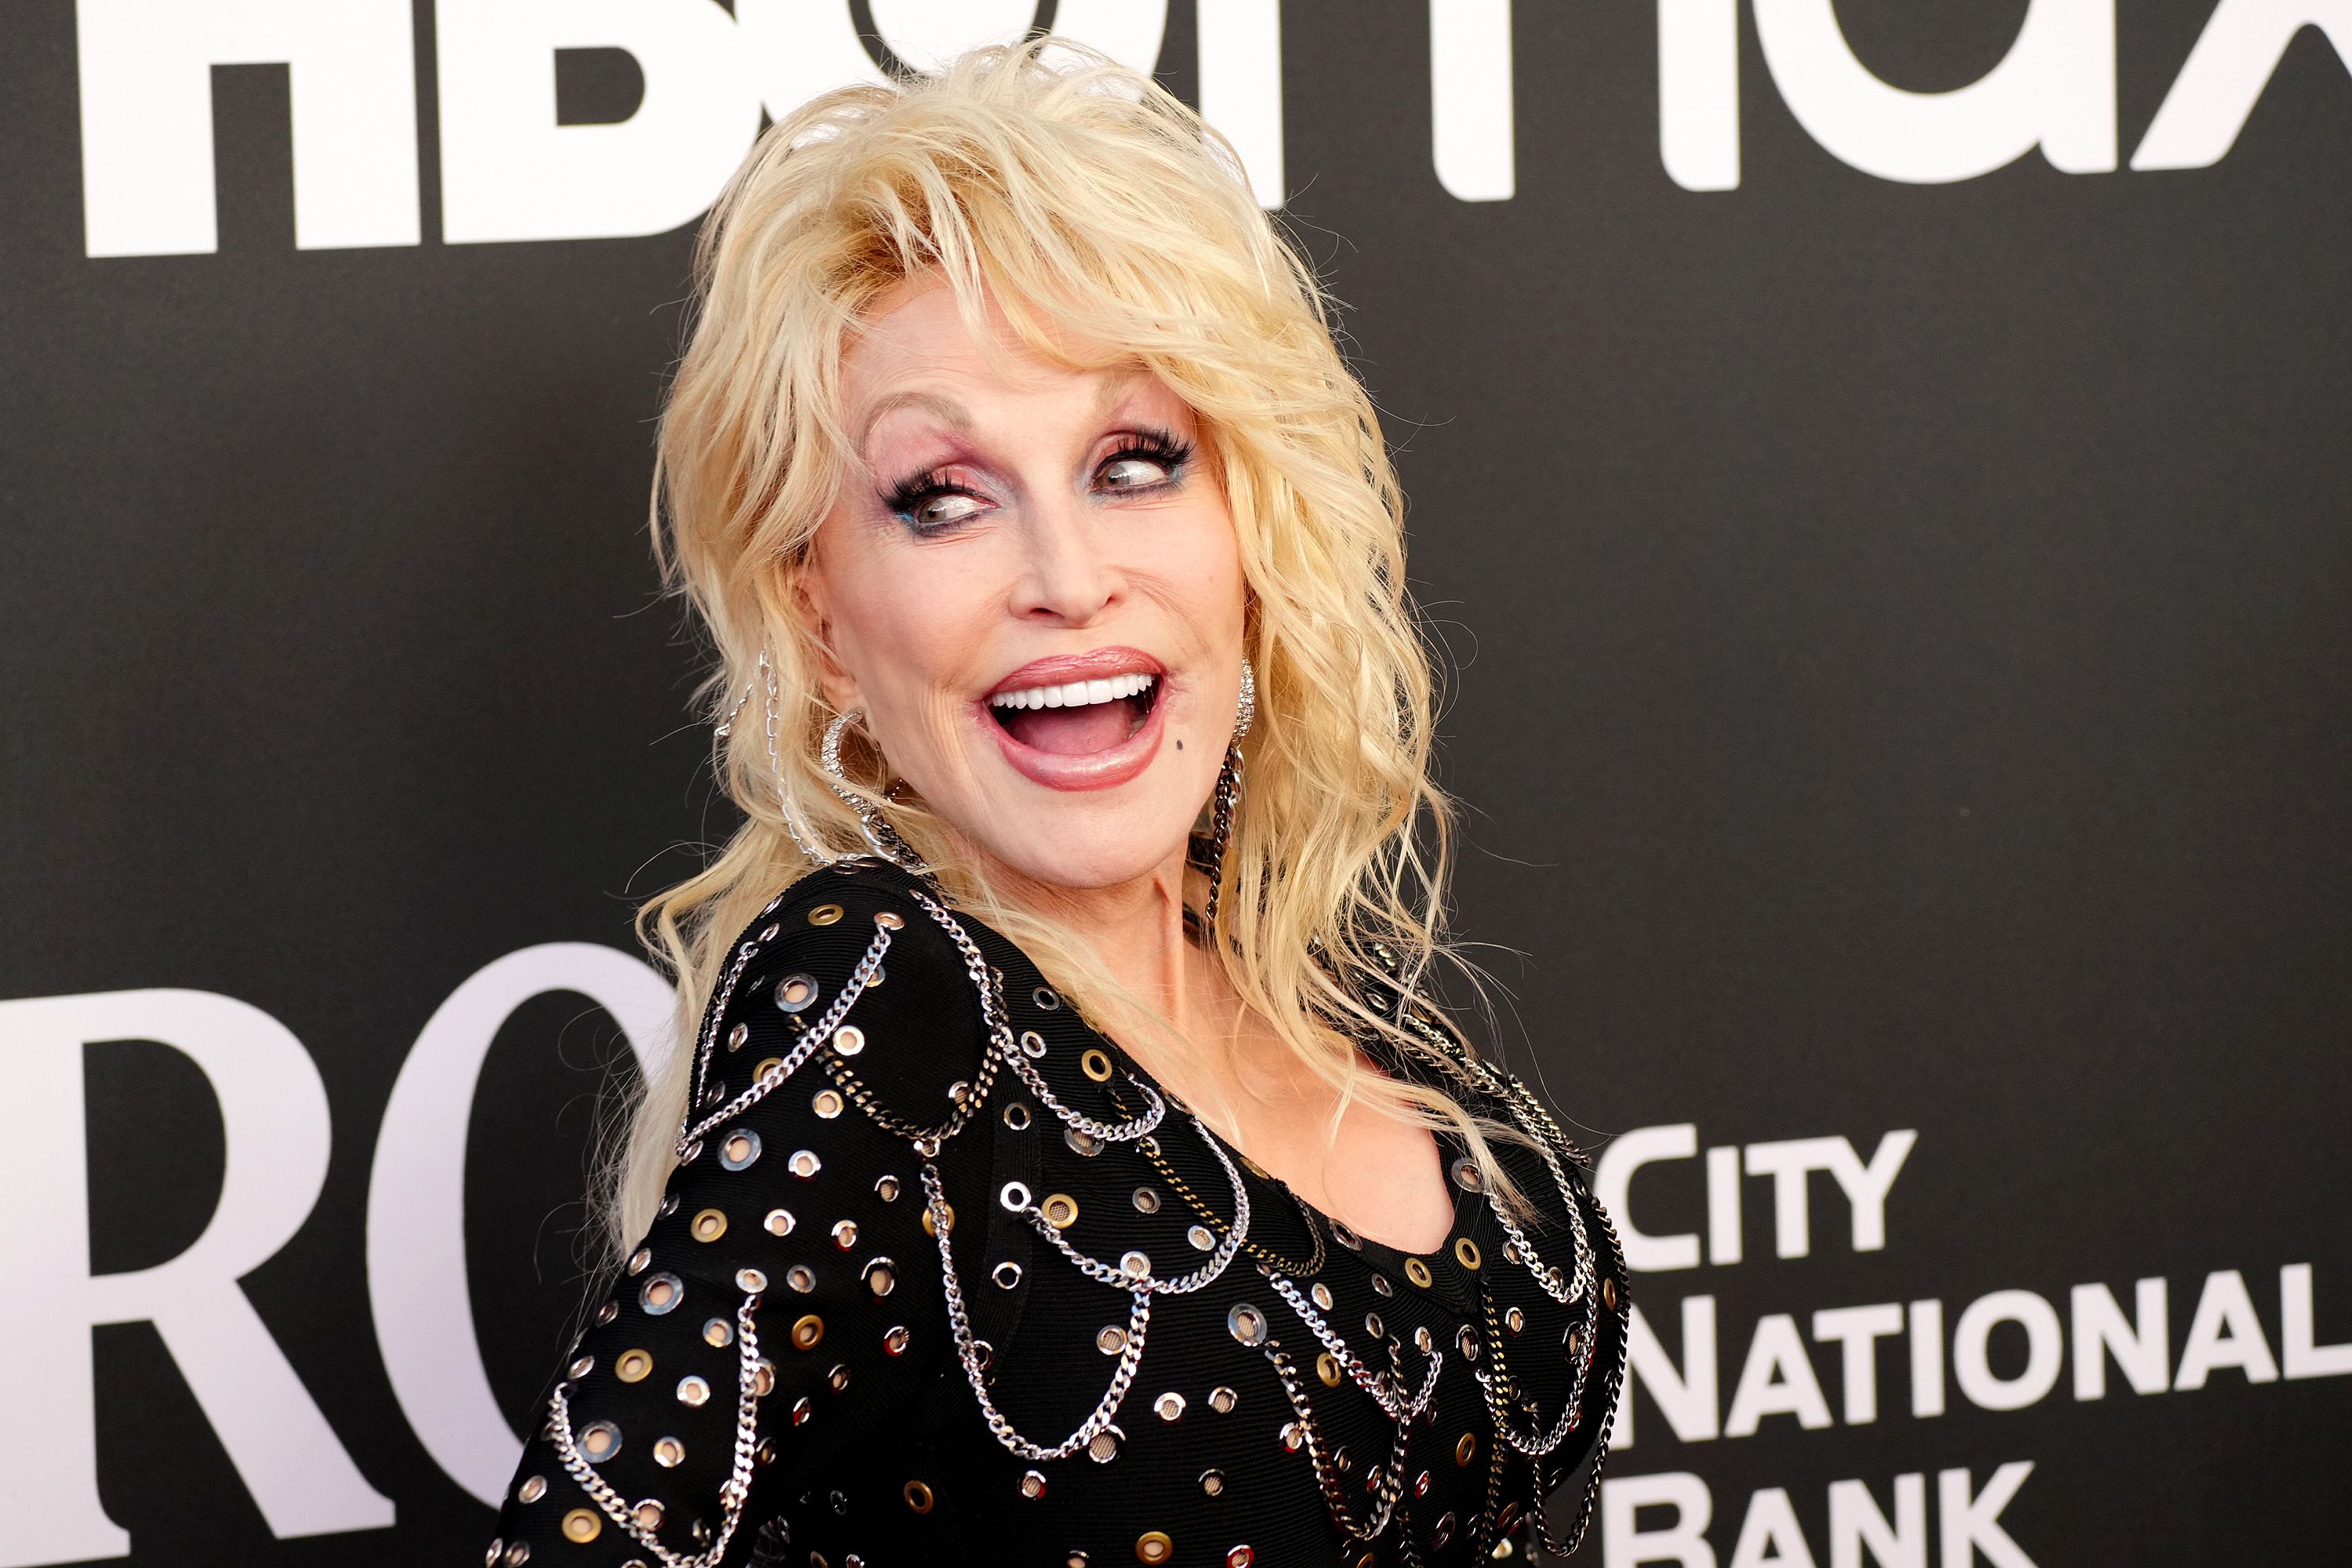 Dolly Parton Turns 77 With Cheeky Take on Aging